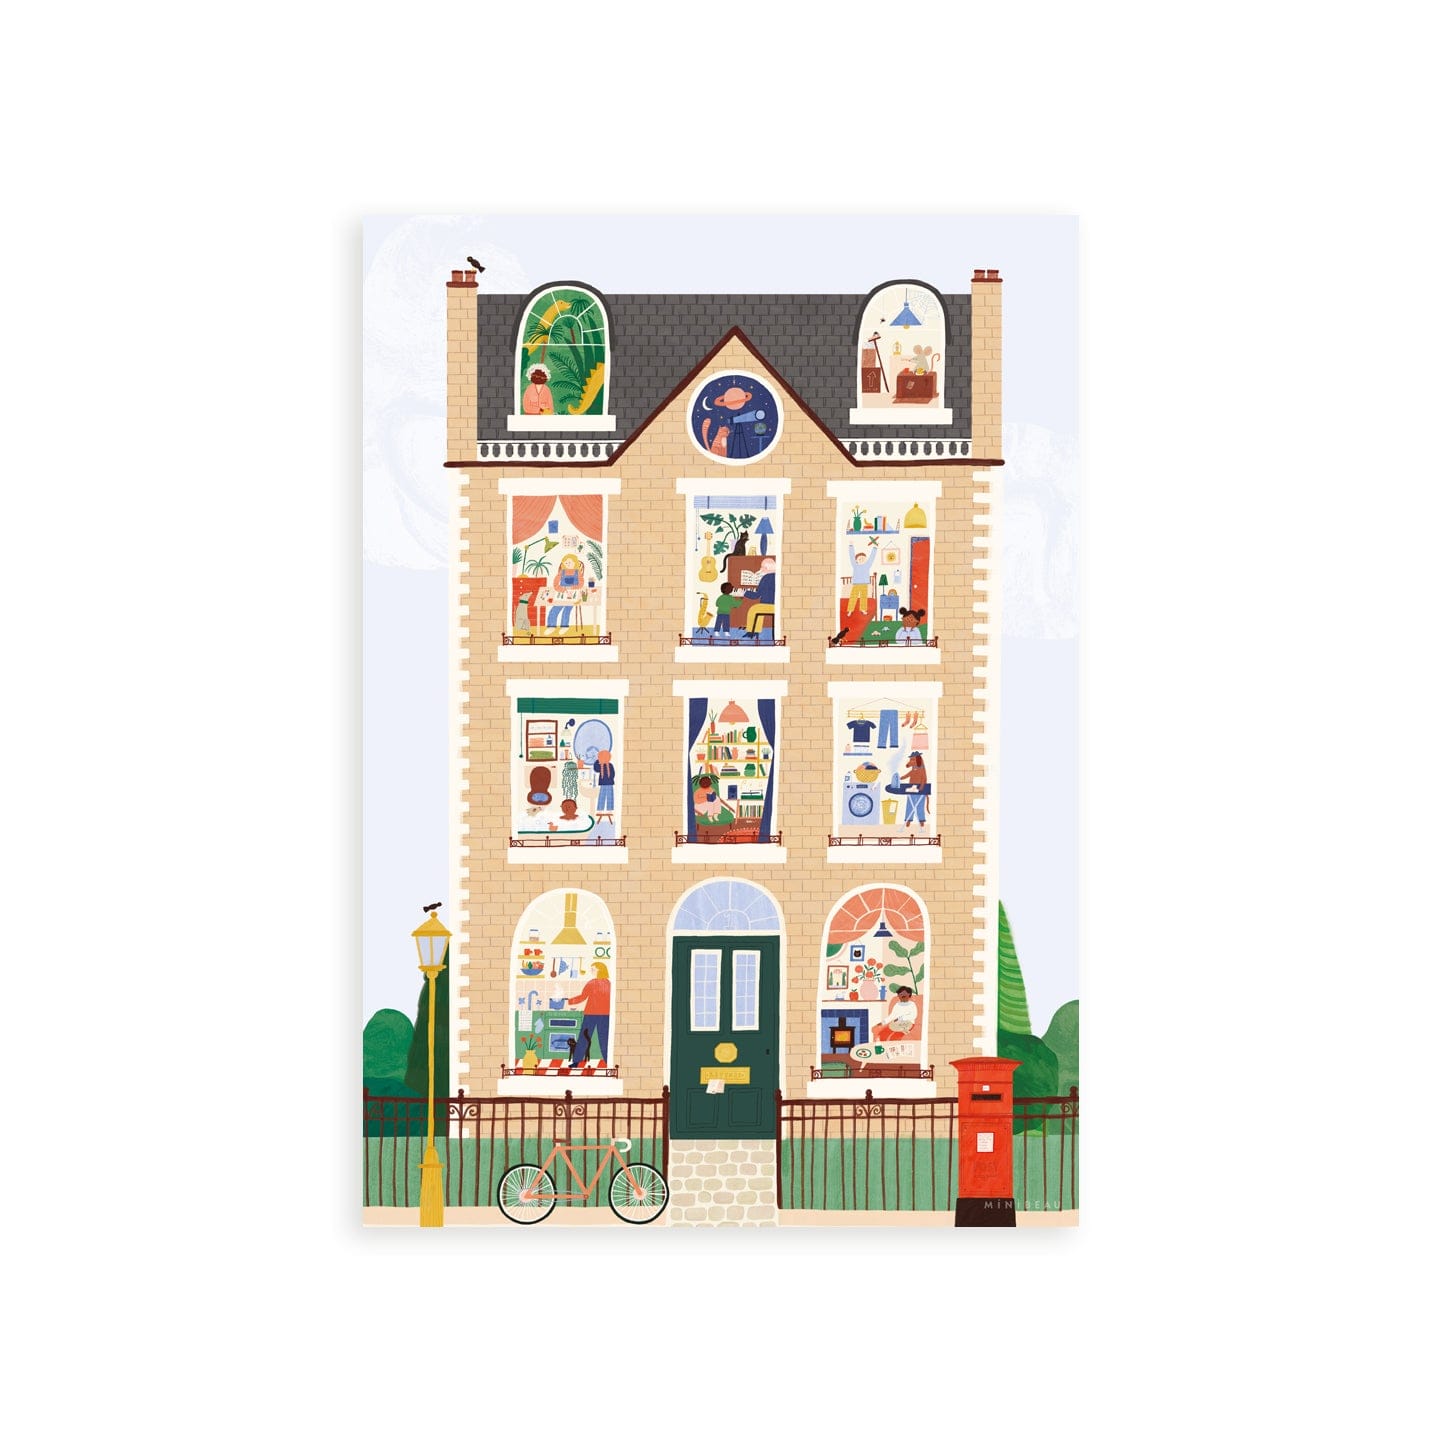 Our House Art Print shows a large brick town house with 11 windows each showing a different scene, from an ironing dog to a dinosaur in the attic to the artist herself hard at work. Features a bike against a railing, a post box, traditional lamppost and hidden birds.